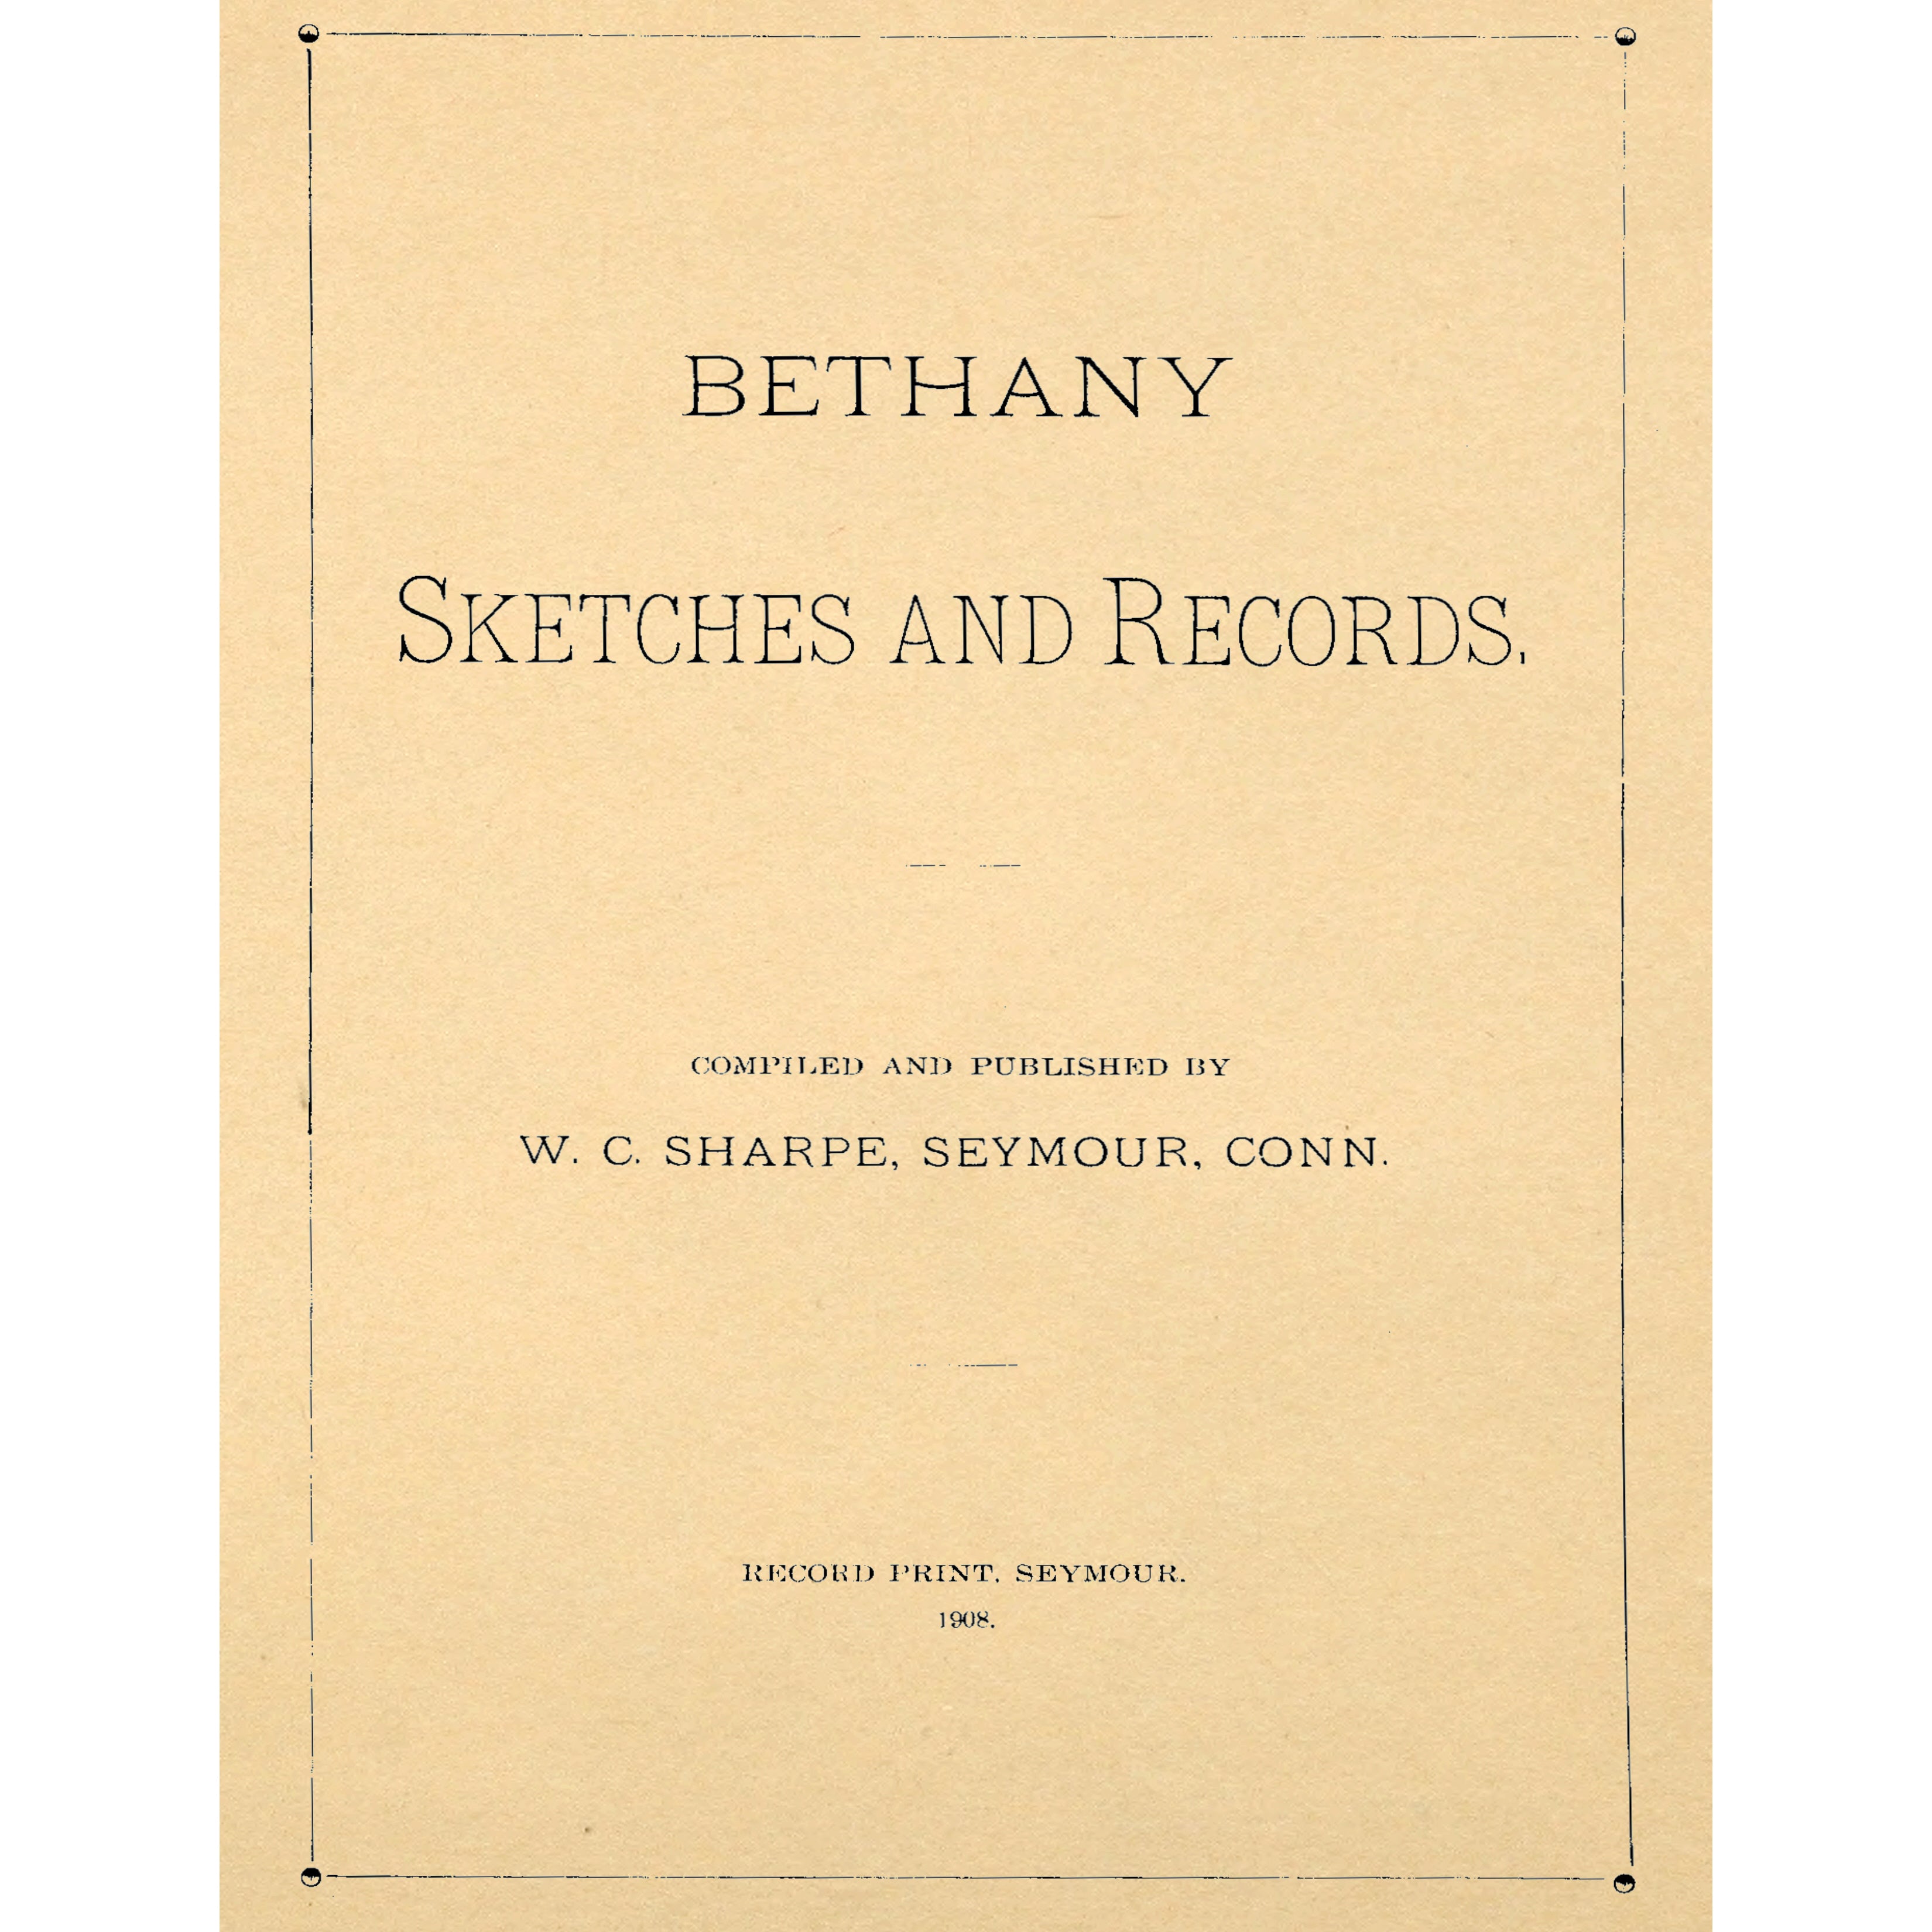 Bethany Sketches and Records [Connecticut]